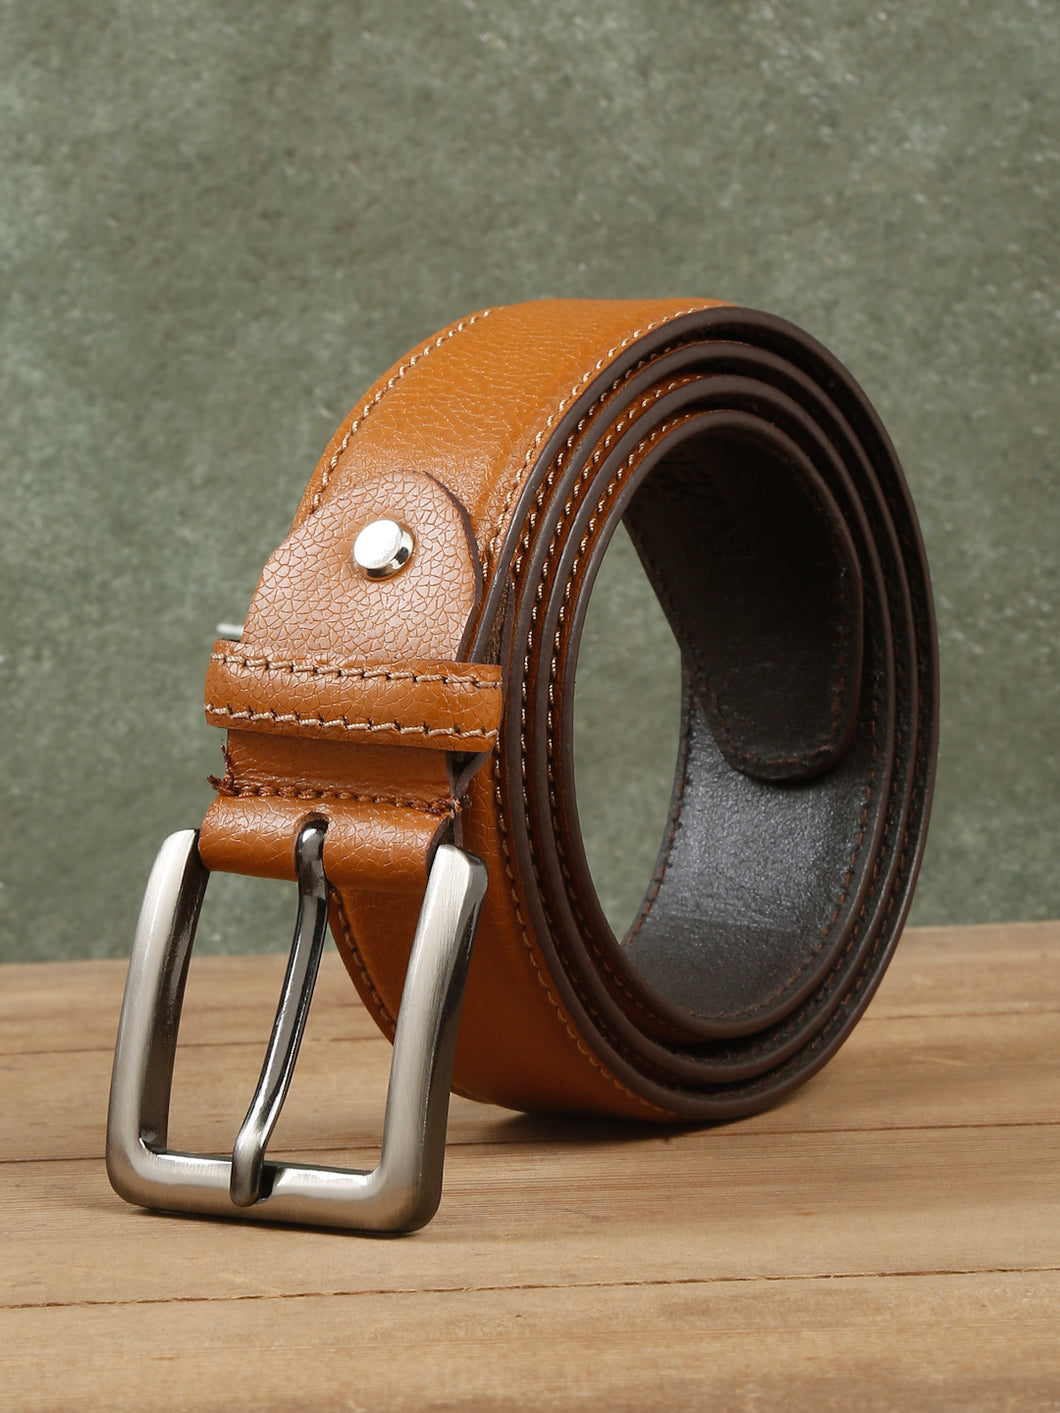 Mens Tan Leather Pin-Buckle Casual Belt